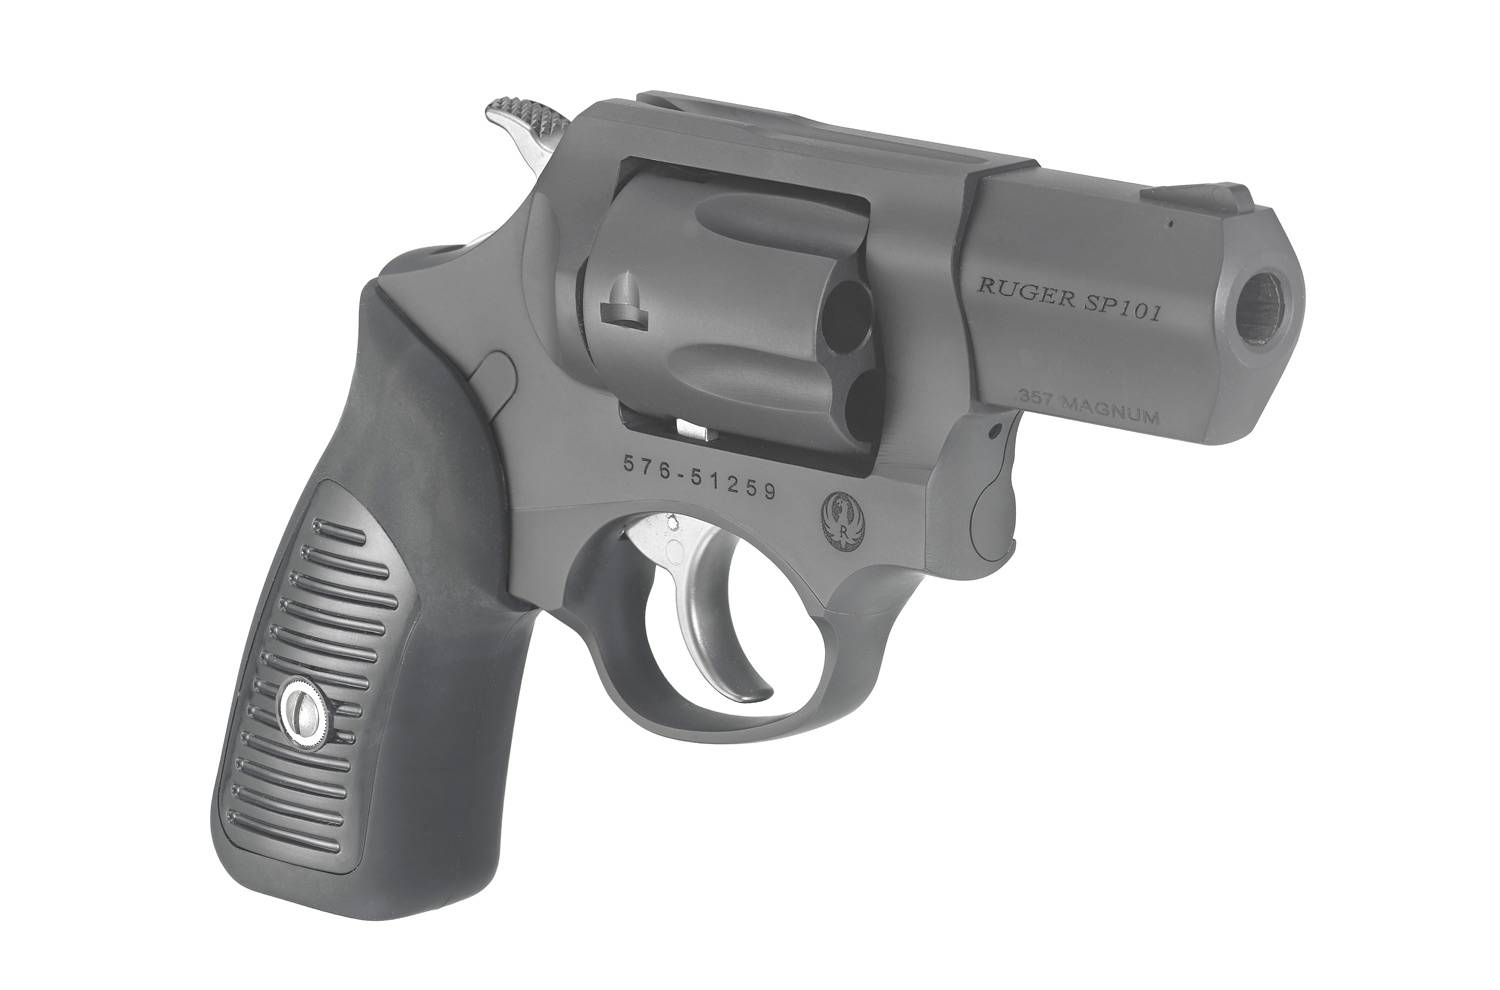 [review] ruger sp101: the tank-like snubby